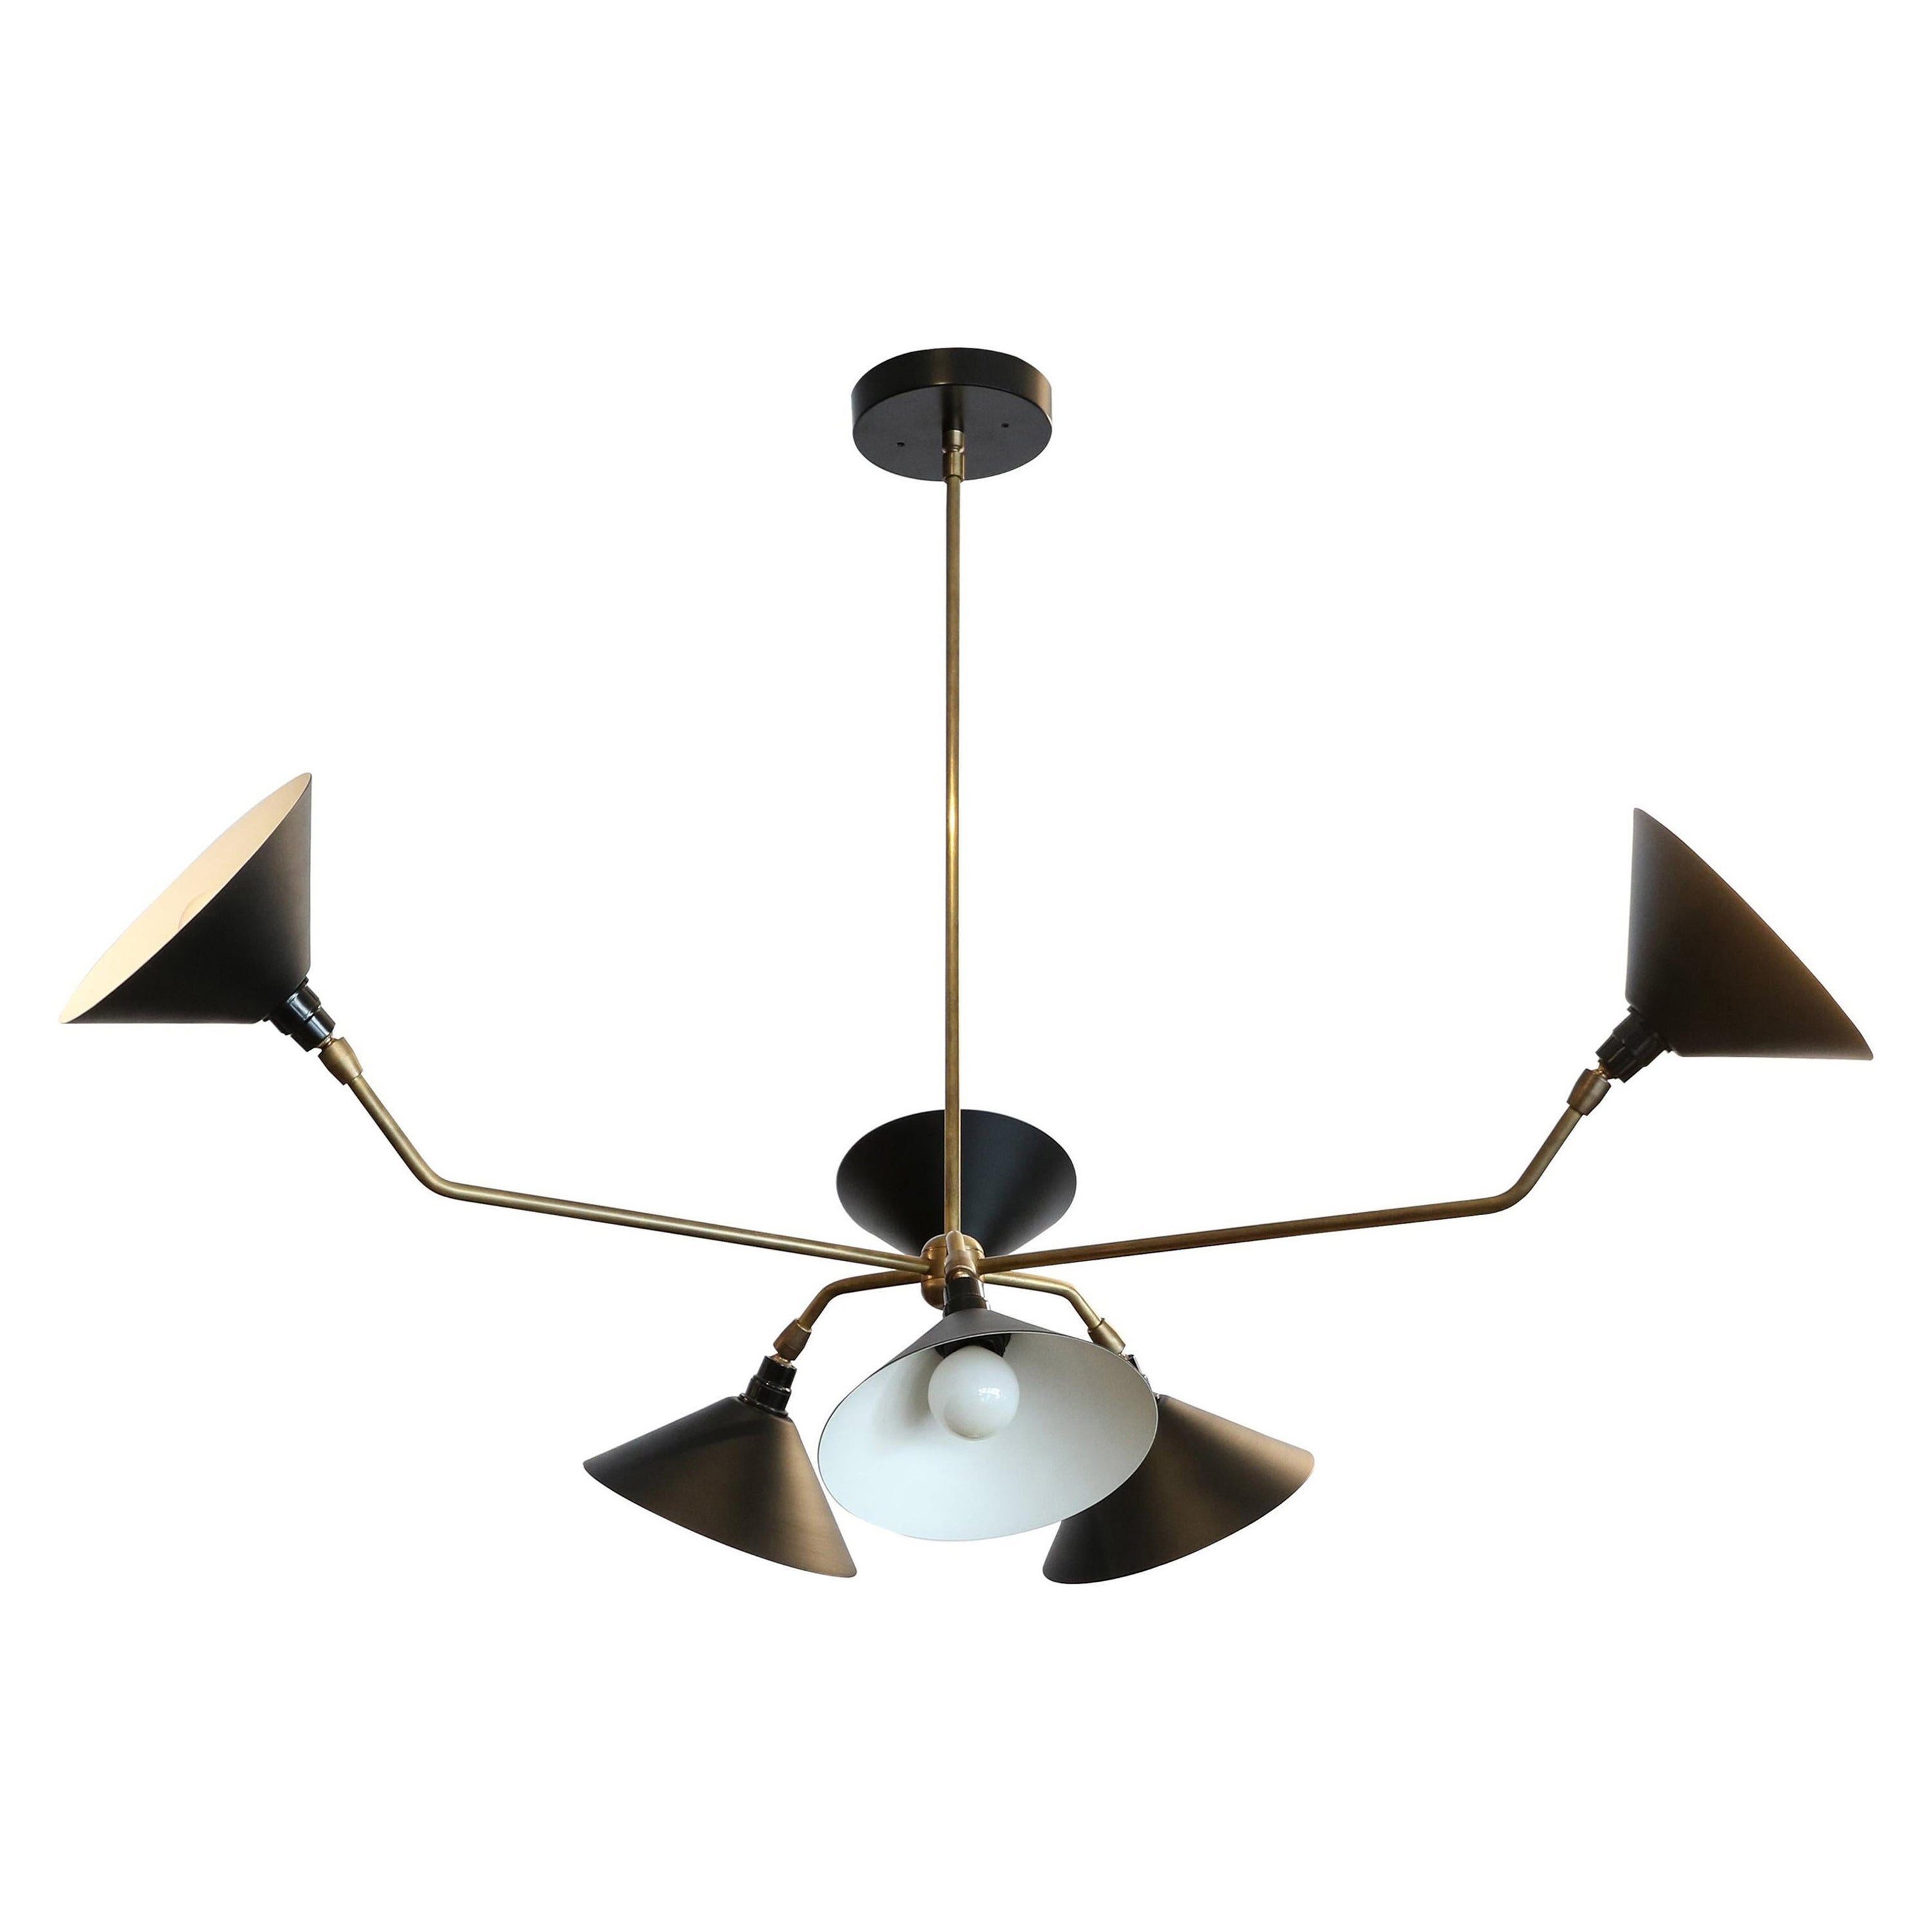 Custom 6 Arm Black Metal & Brass Midcentury Style Chandelier by Adesso Imports